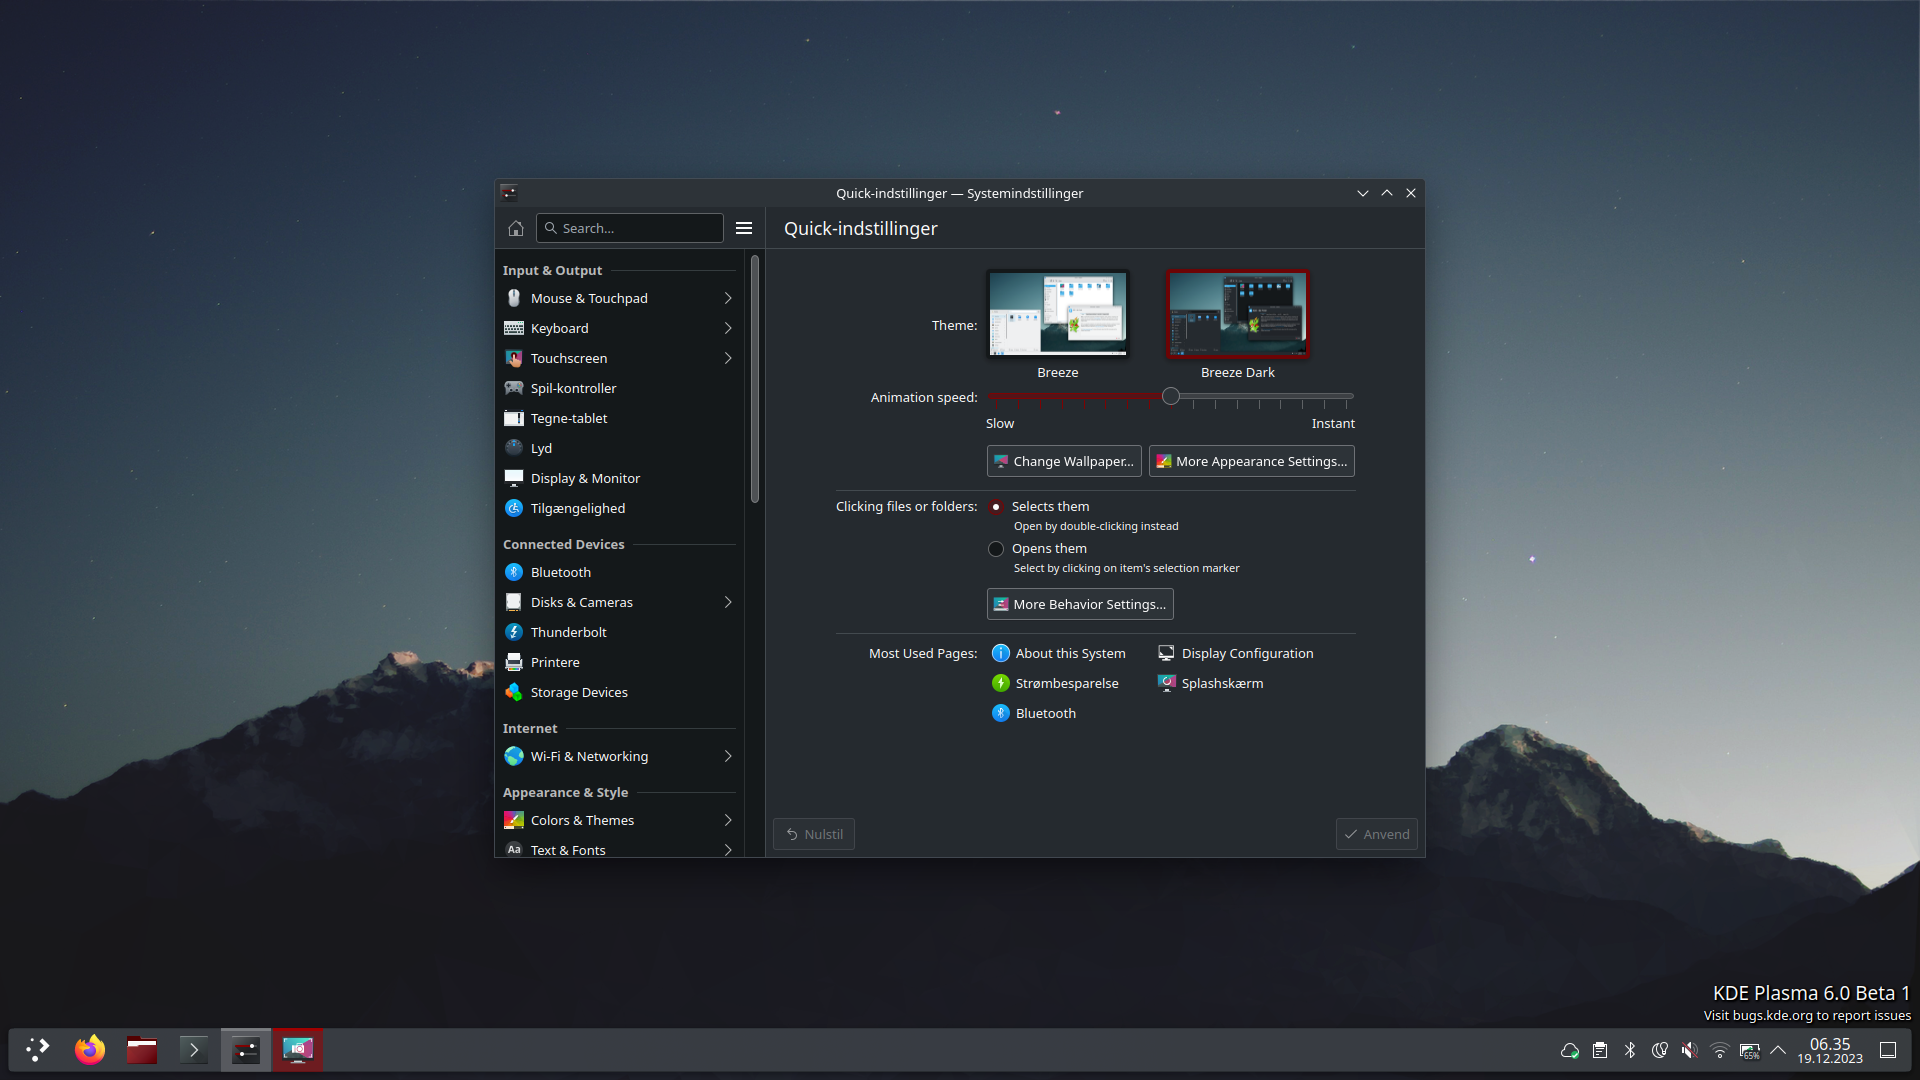 How to get Plasma 6 on Arch Linux